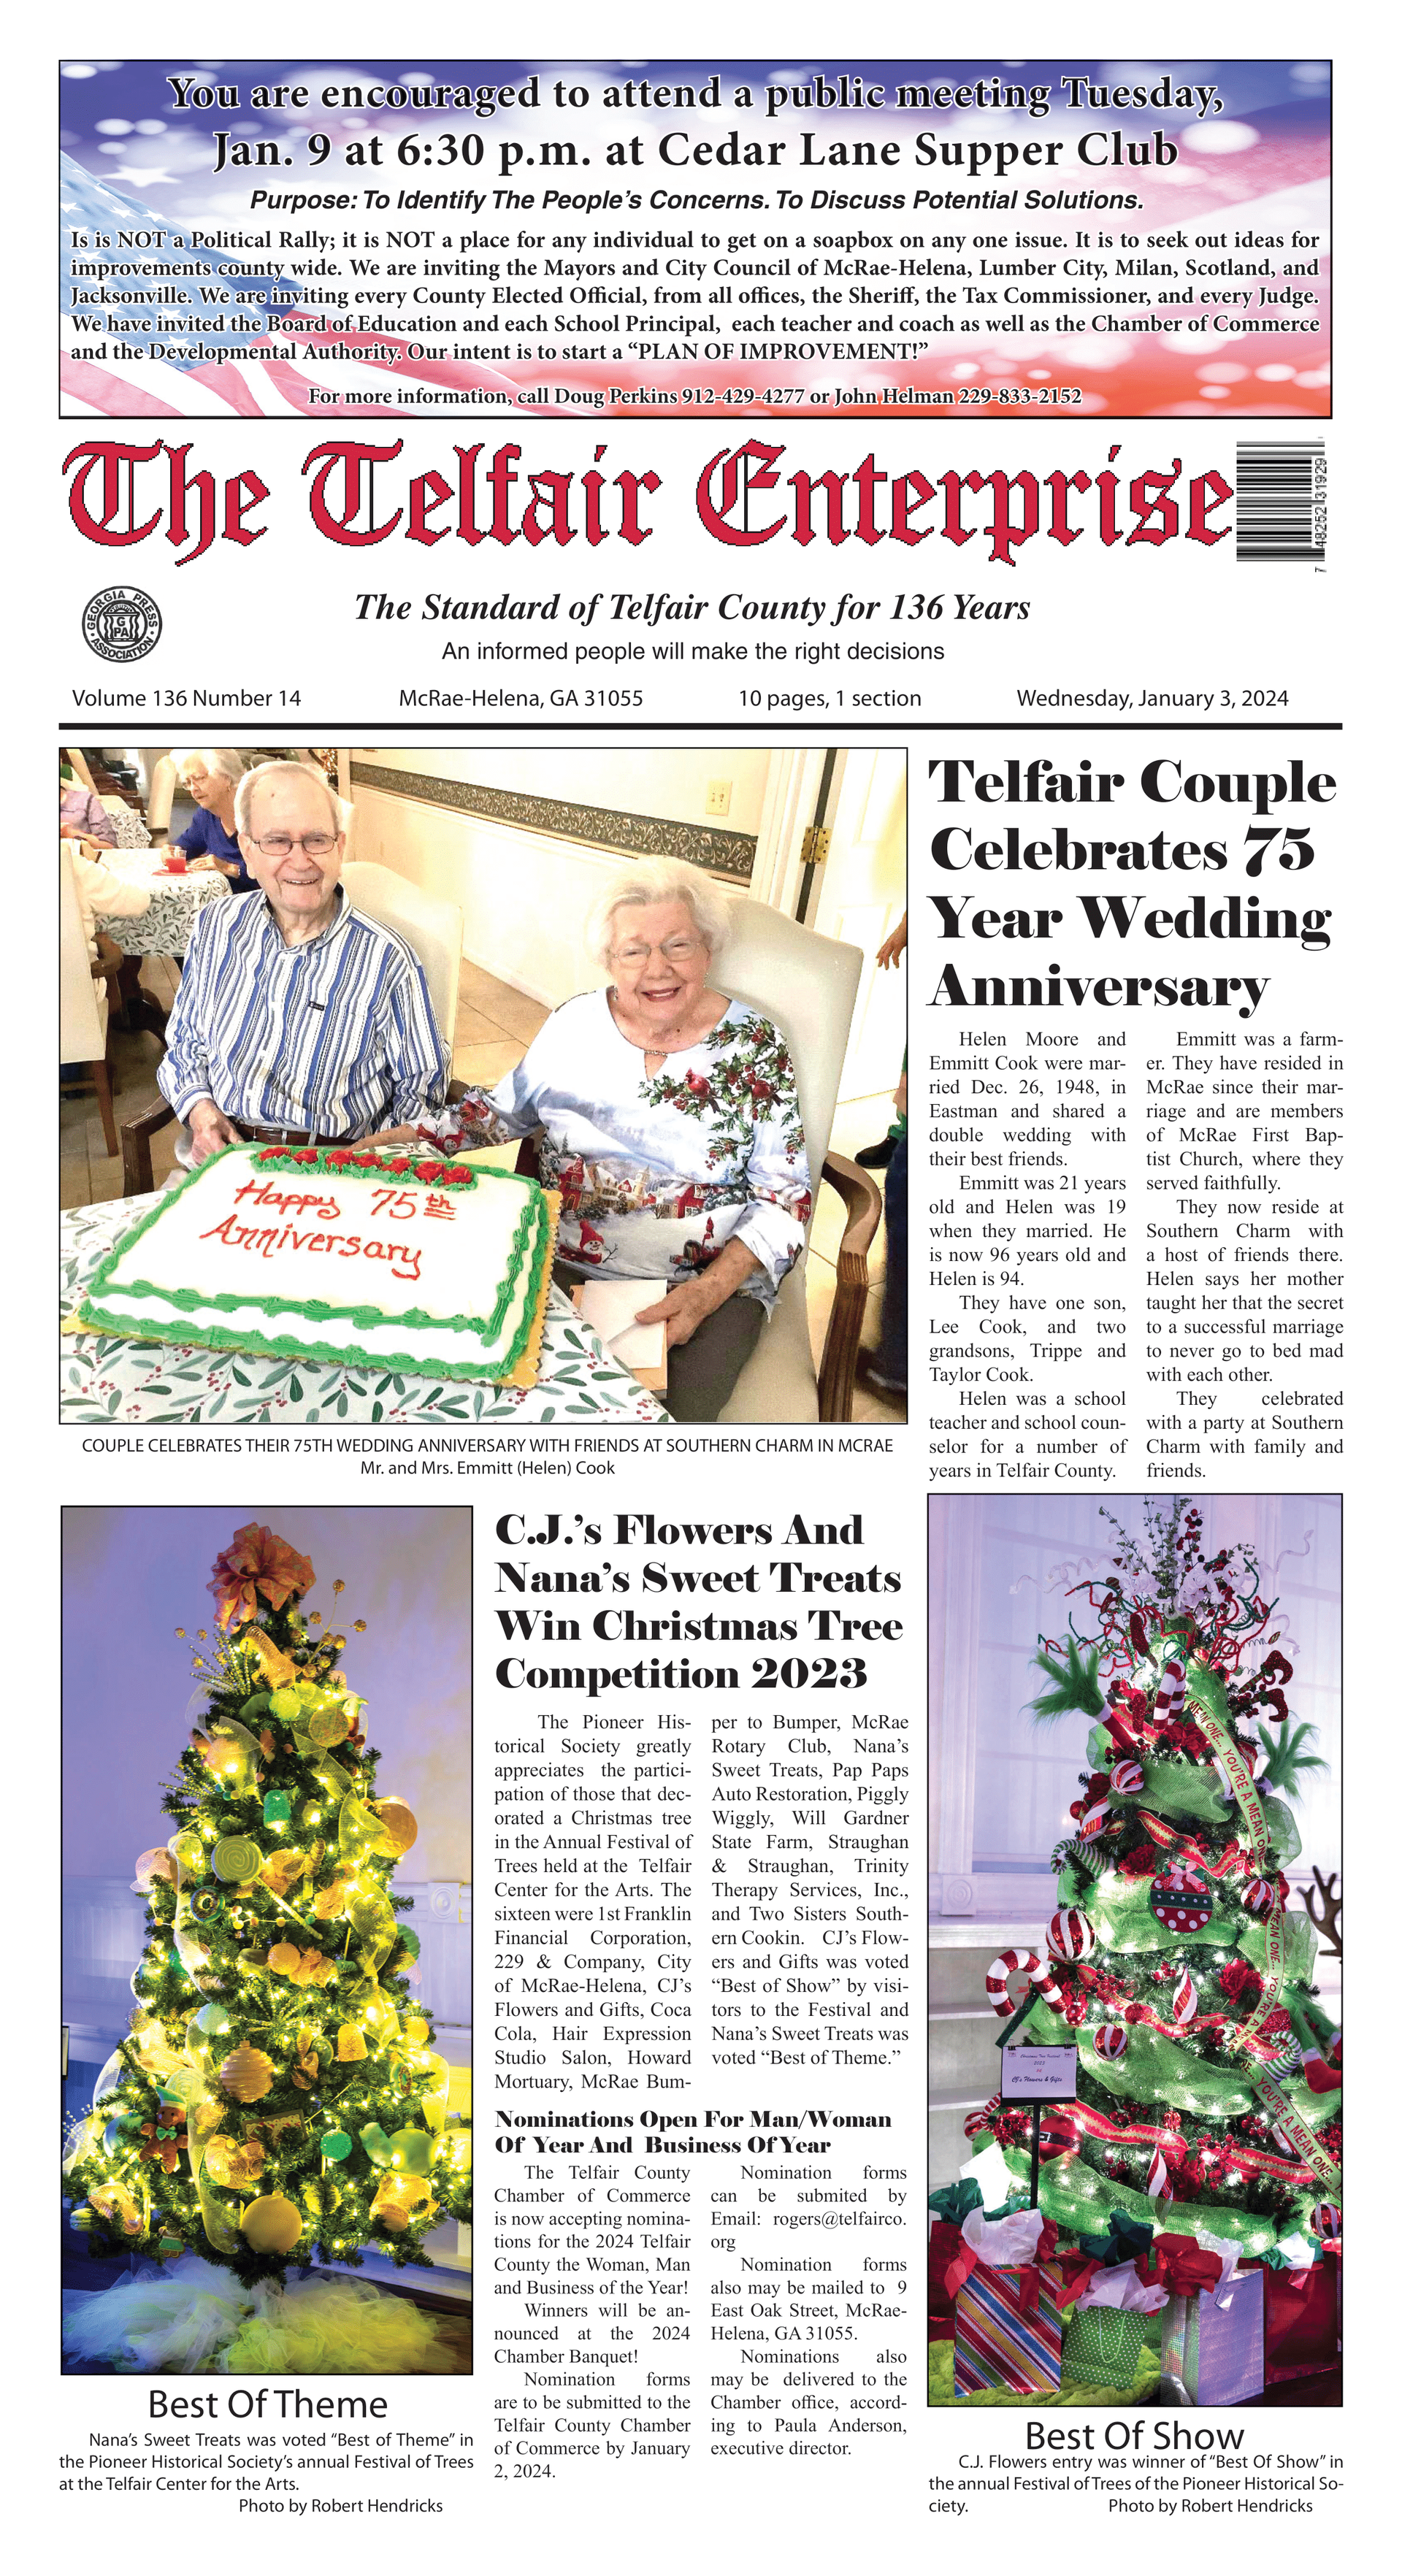 A newspaper with a picture of a man and woman holding a cake and a christmas tree on the front page.